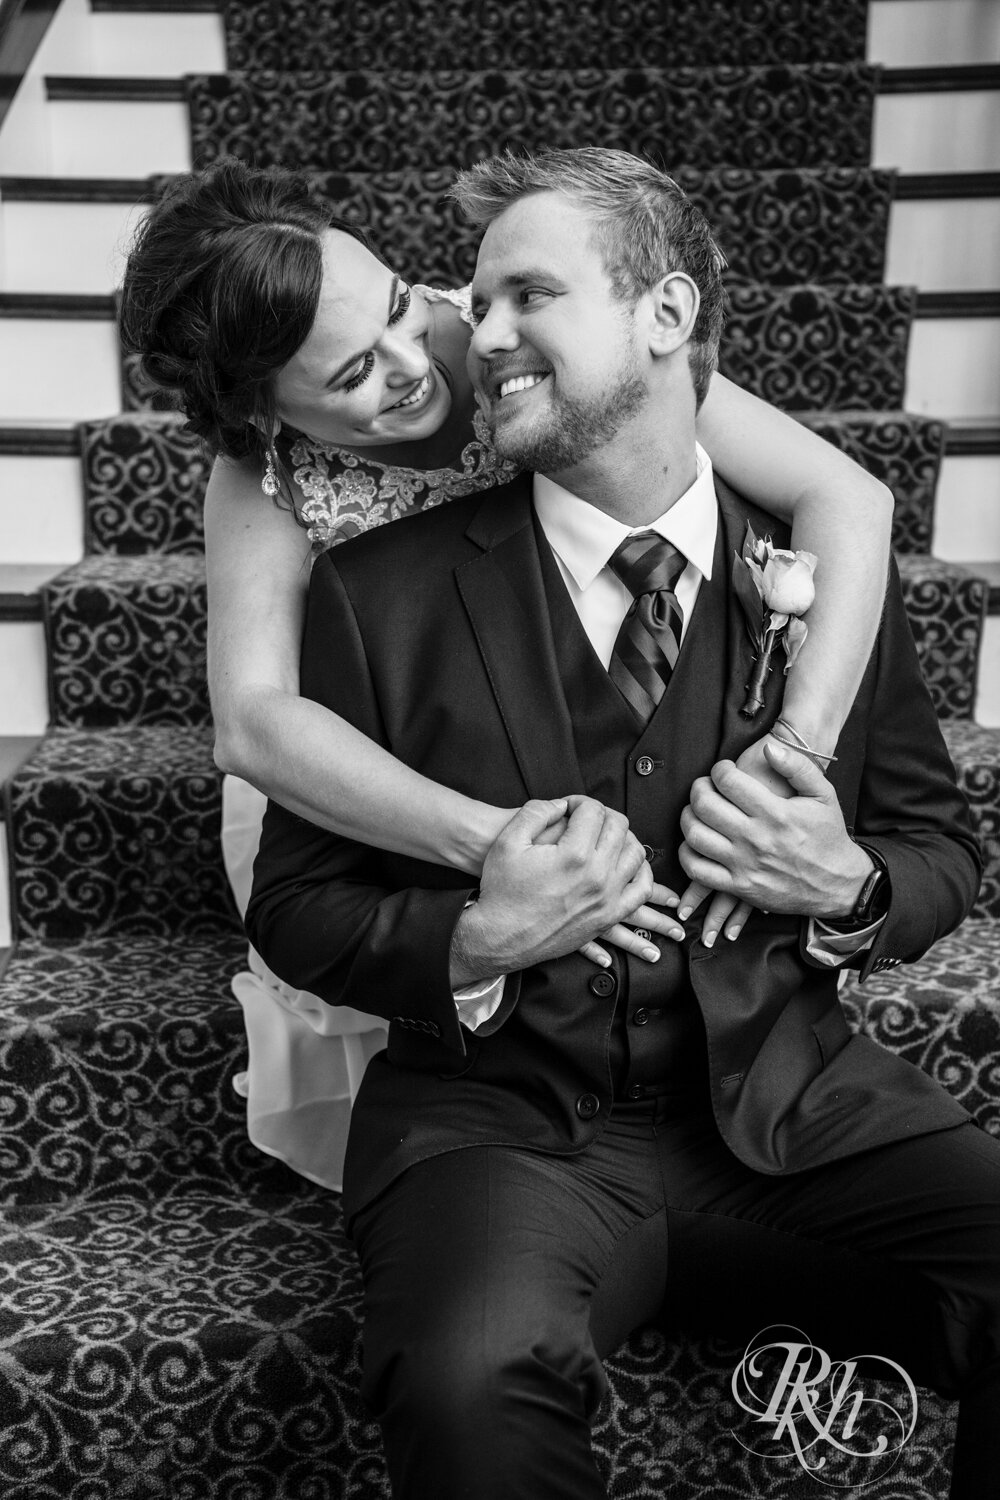 Bride and groom smile on stairs at Crown Room in Rogers, Minnesota.